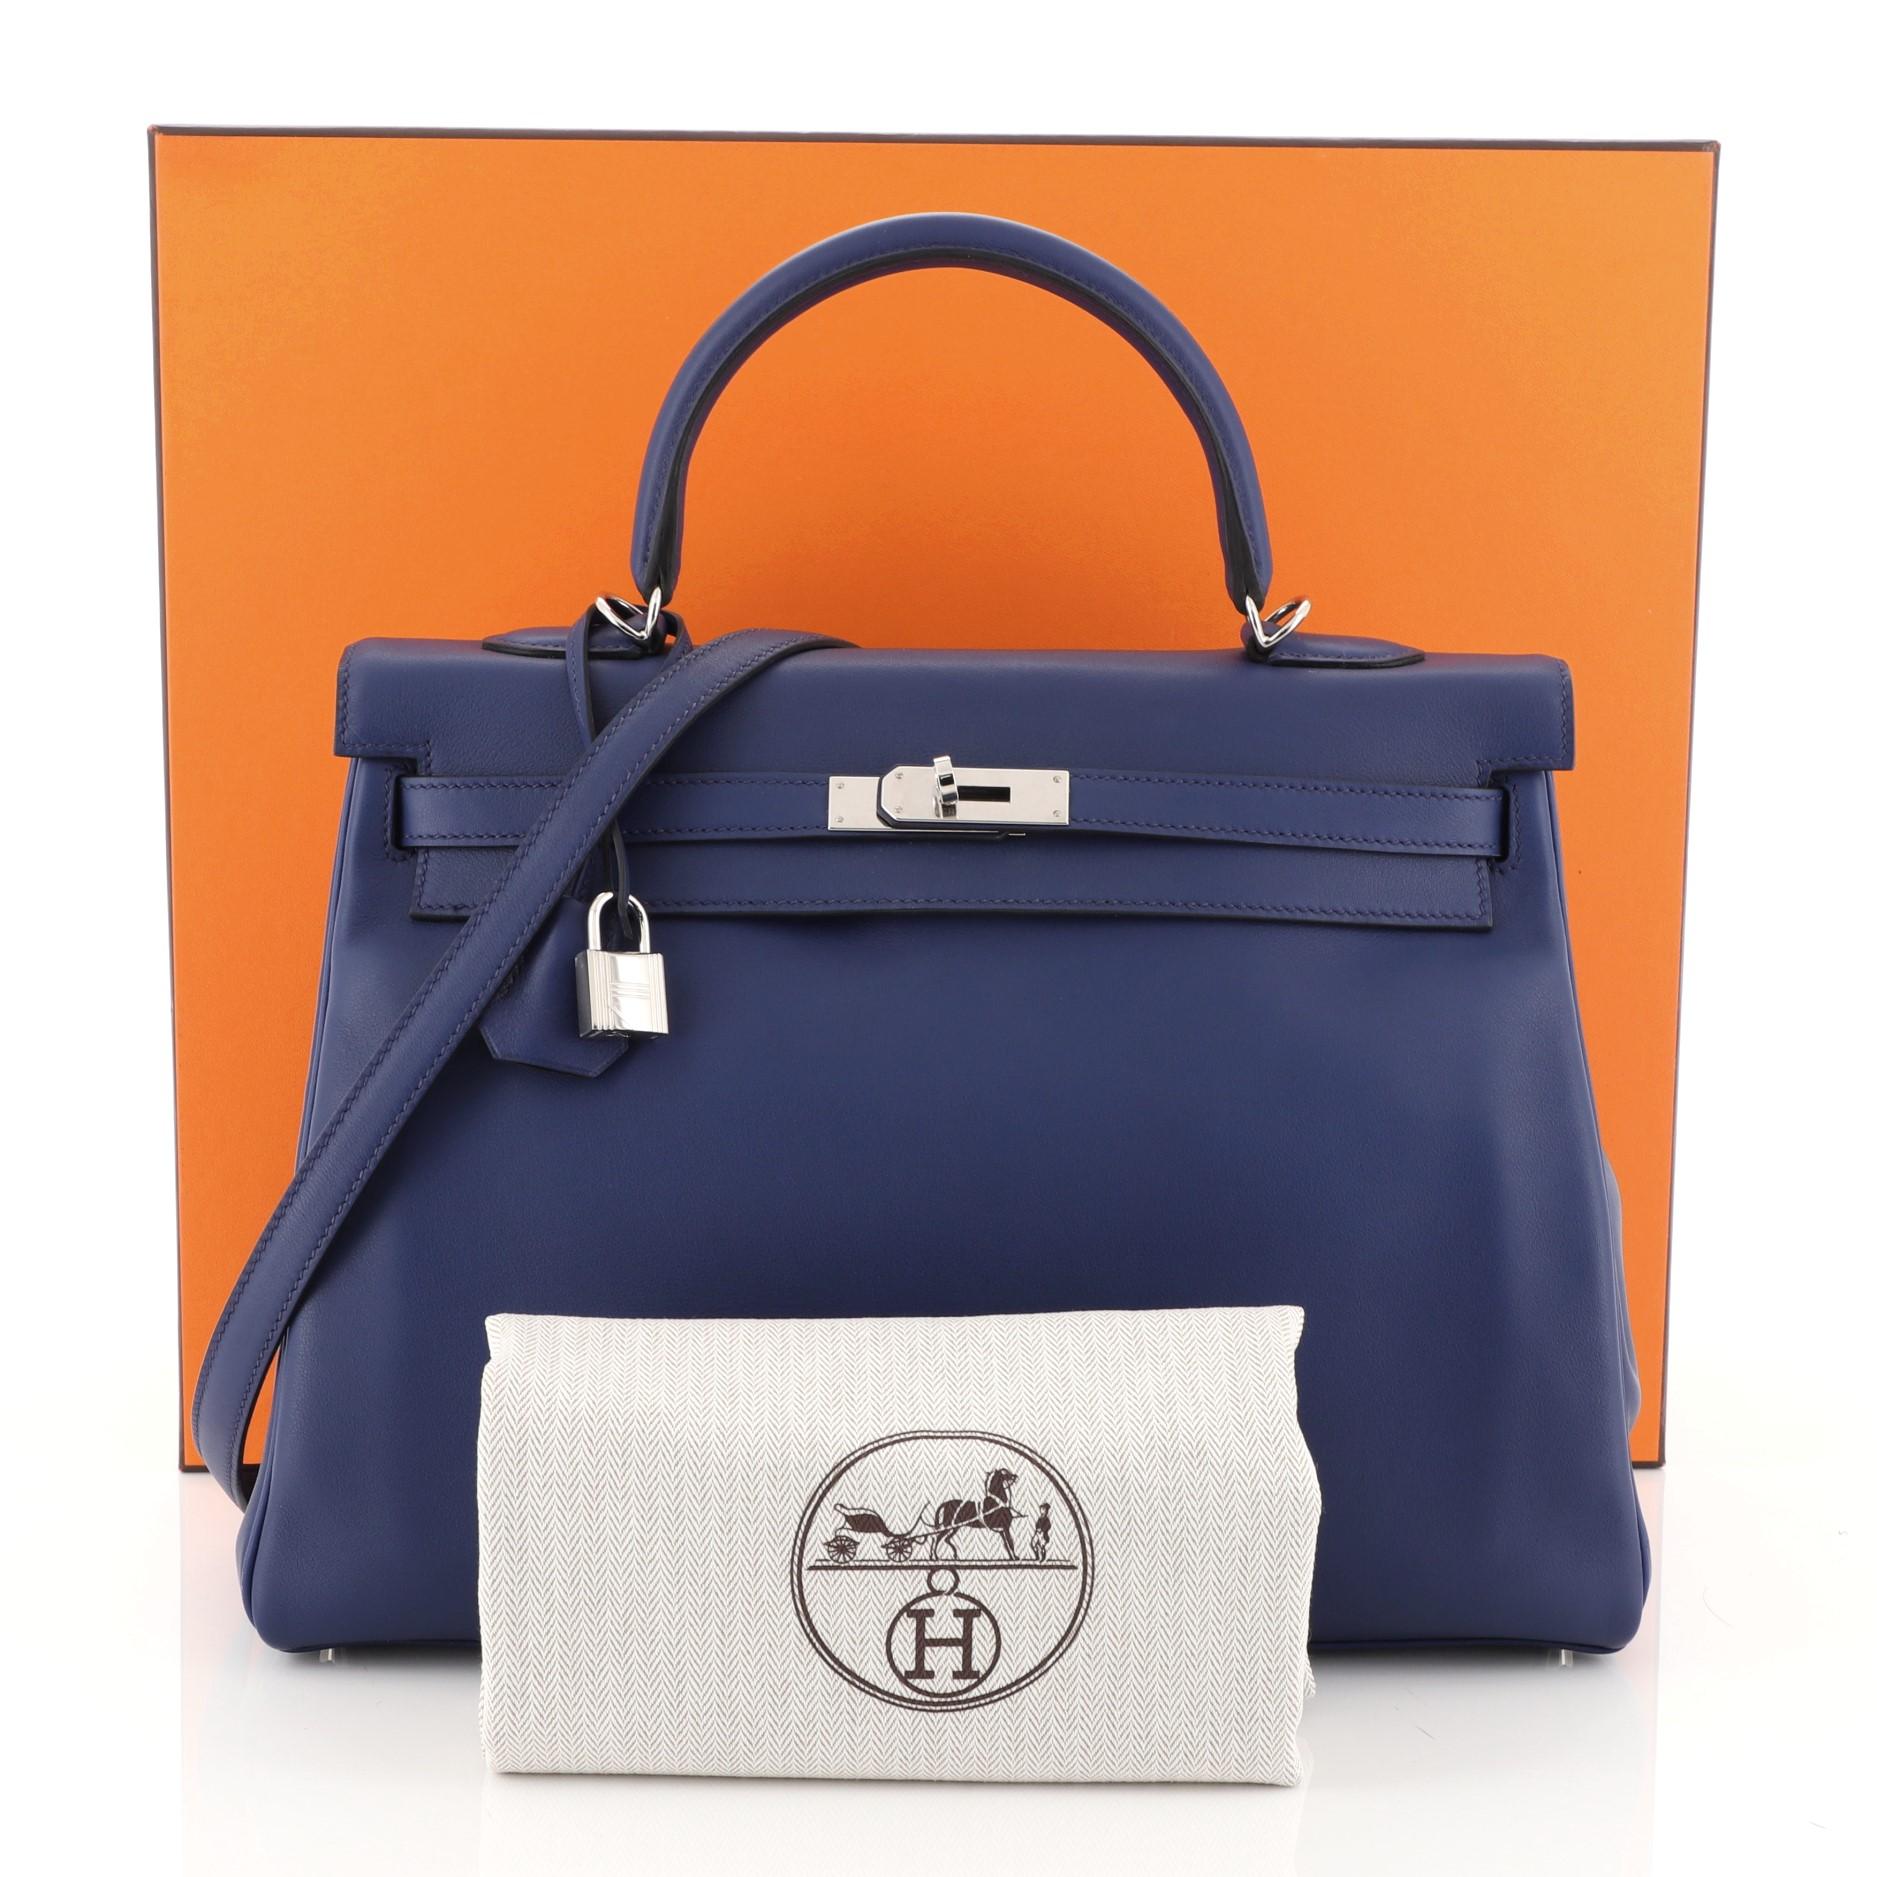 This Hermes Kelly Handbag Blue Saphir Swift with Palladium Hardware 35, crafted in Blue Saphir blue Swift leather, features a single rolled top handle, protective base studs, and palladium hardware. Its turn-lock closure opens to a Blue Saphir blue